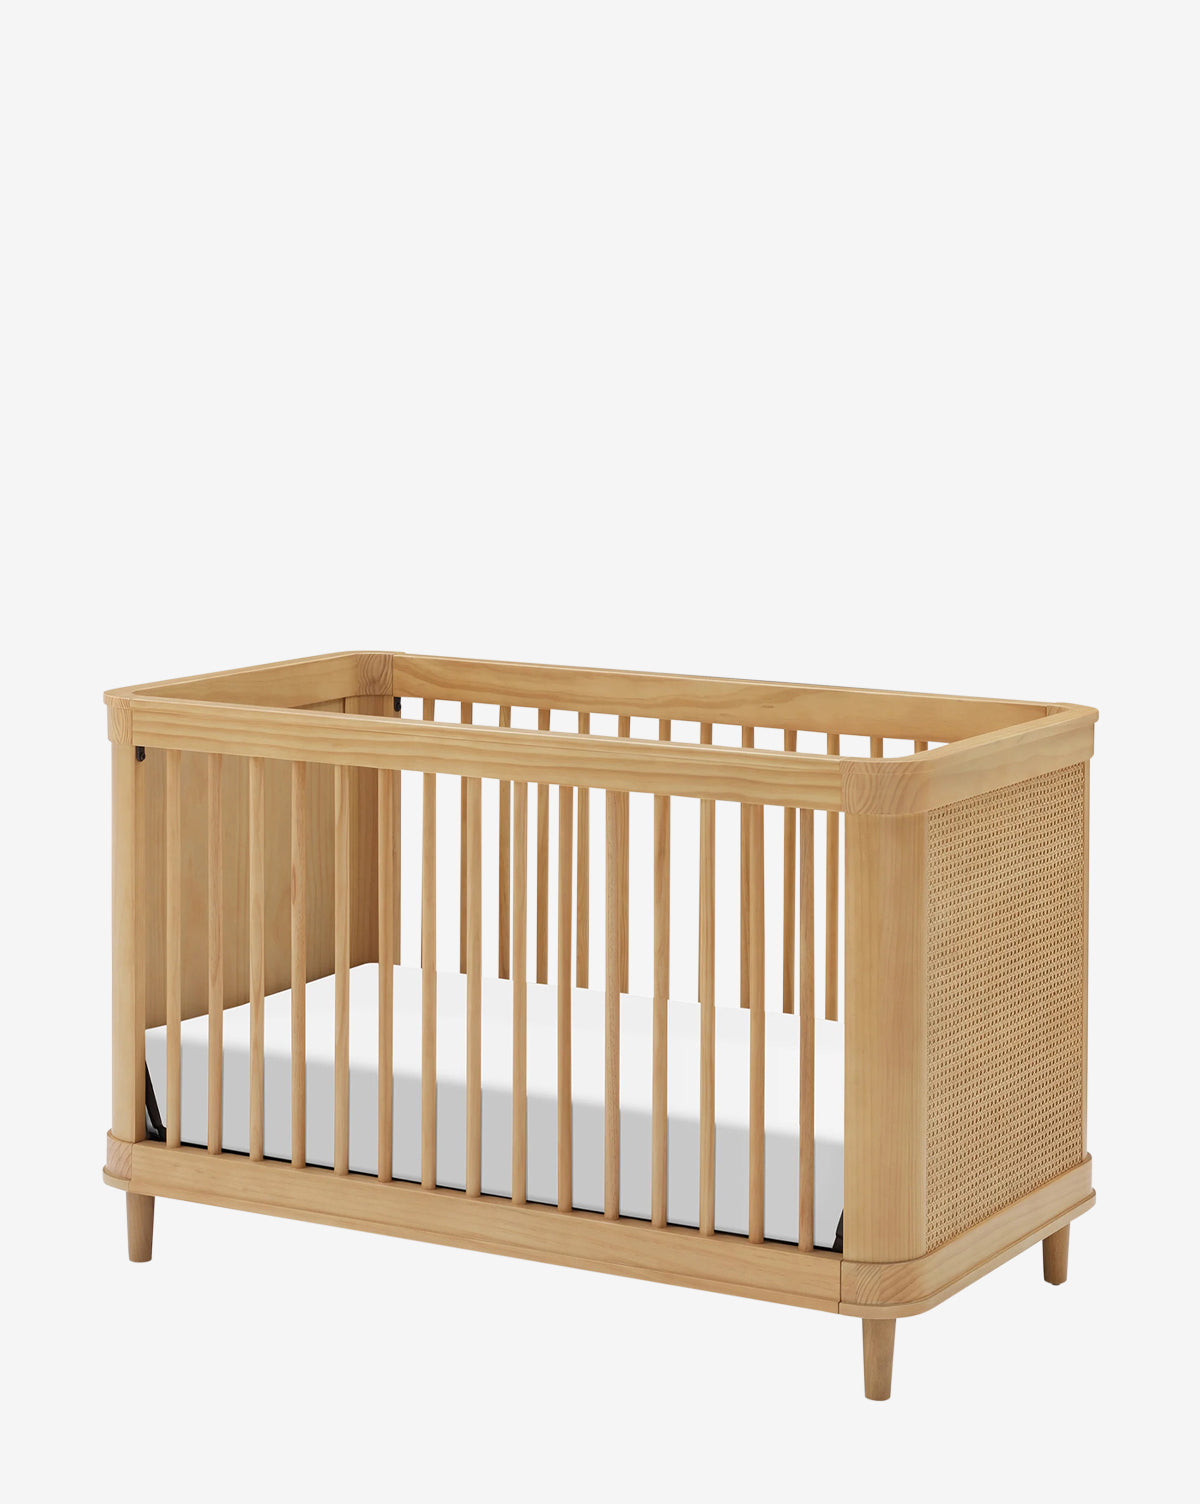 Million Dollar Baby, Marin with Cane 3-in-1 Convertible Crib